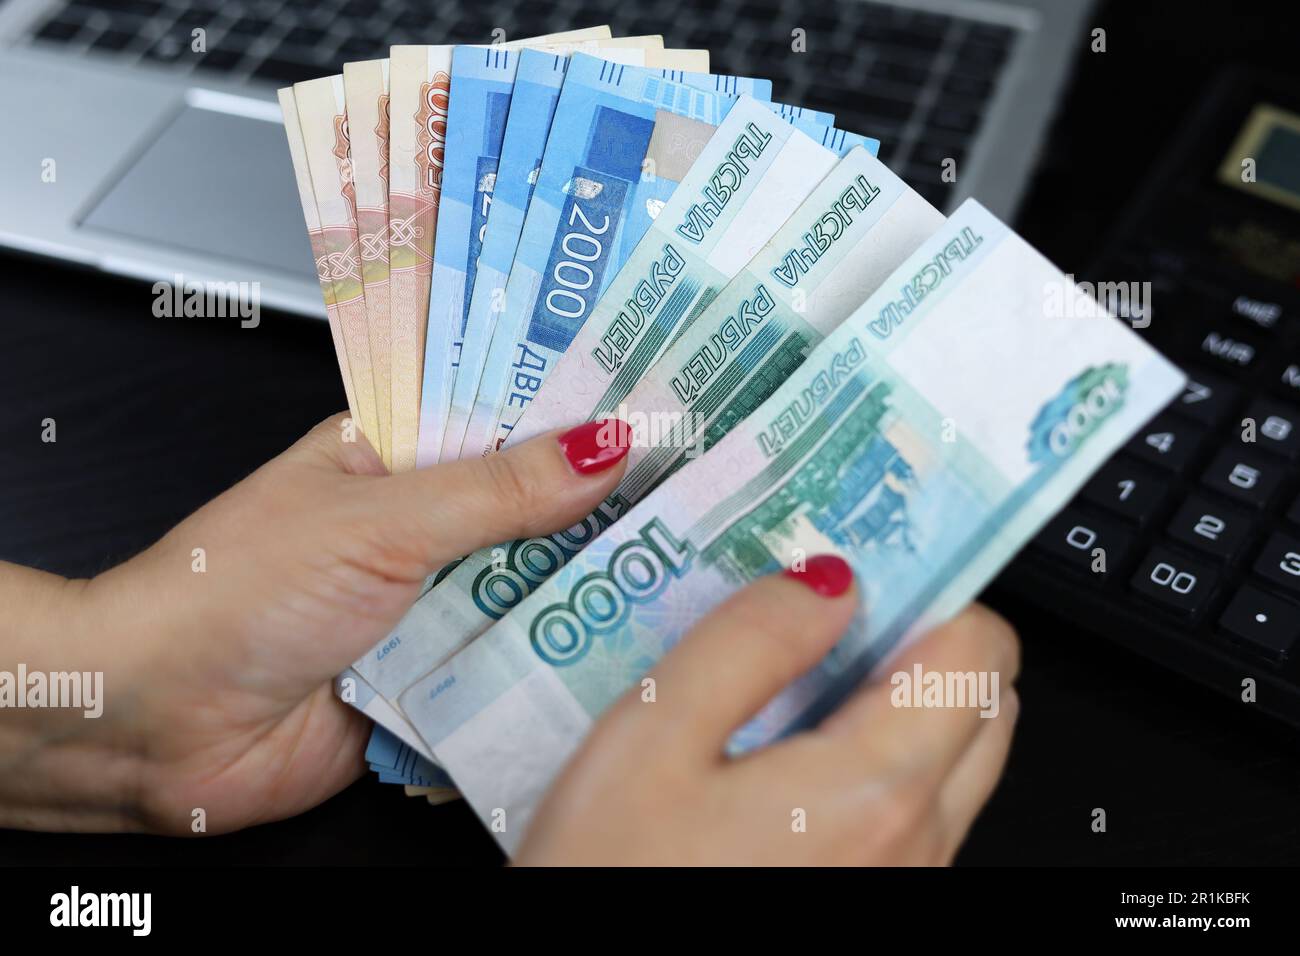 Russian rubles in hands of woman on laptop and calculator background. Wages in Russia, bonus or bribe concept Stock Photo